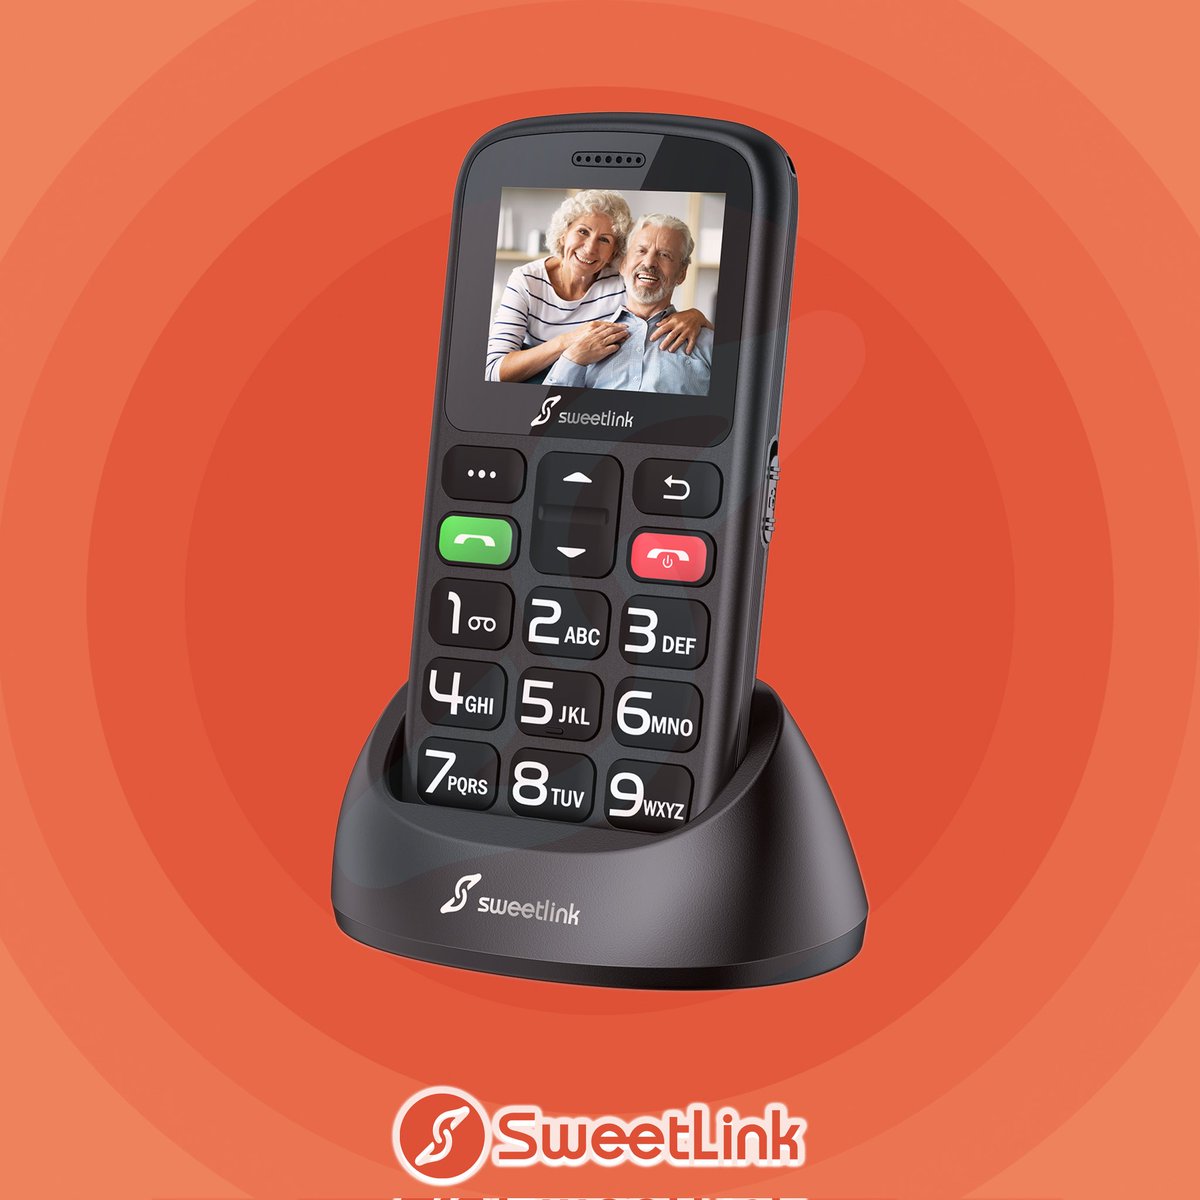 Make sure your loved one is always connected at home with the Sweetlink S2 Plus.
Charging dock is extreamly friendly to the elderly who has bad eyesight or hands operation abilty.
#Summer #LiveConnected #SeniorLiving #SeniorLivingCommunity #SeniorCitizen #HealthTech #Aging